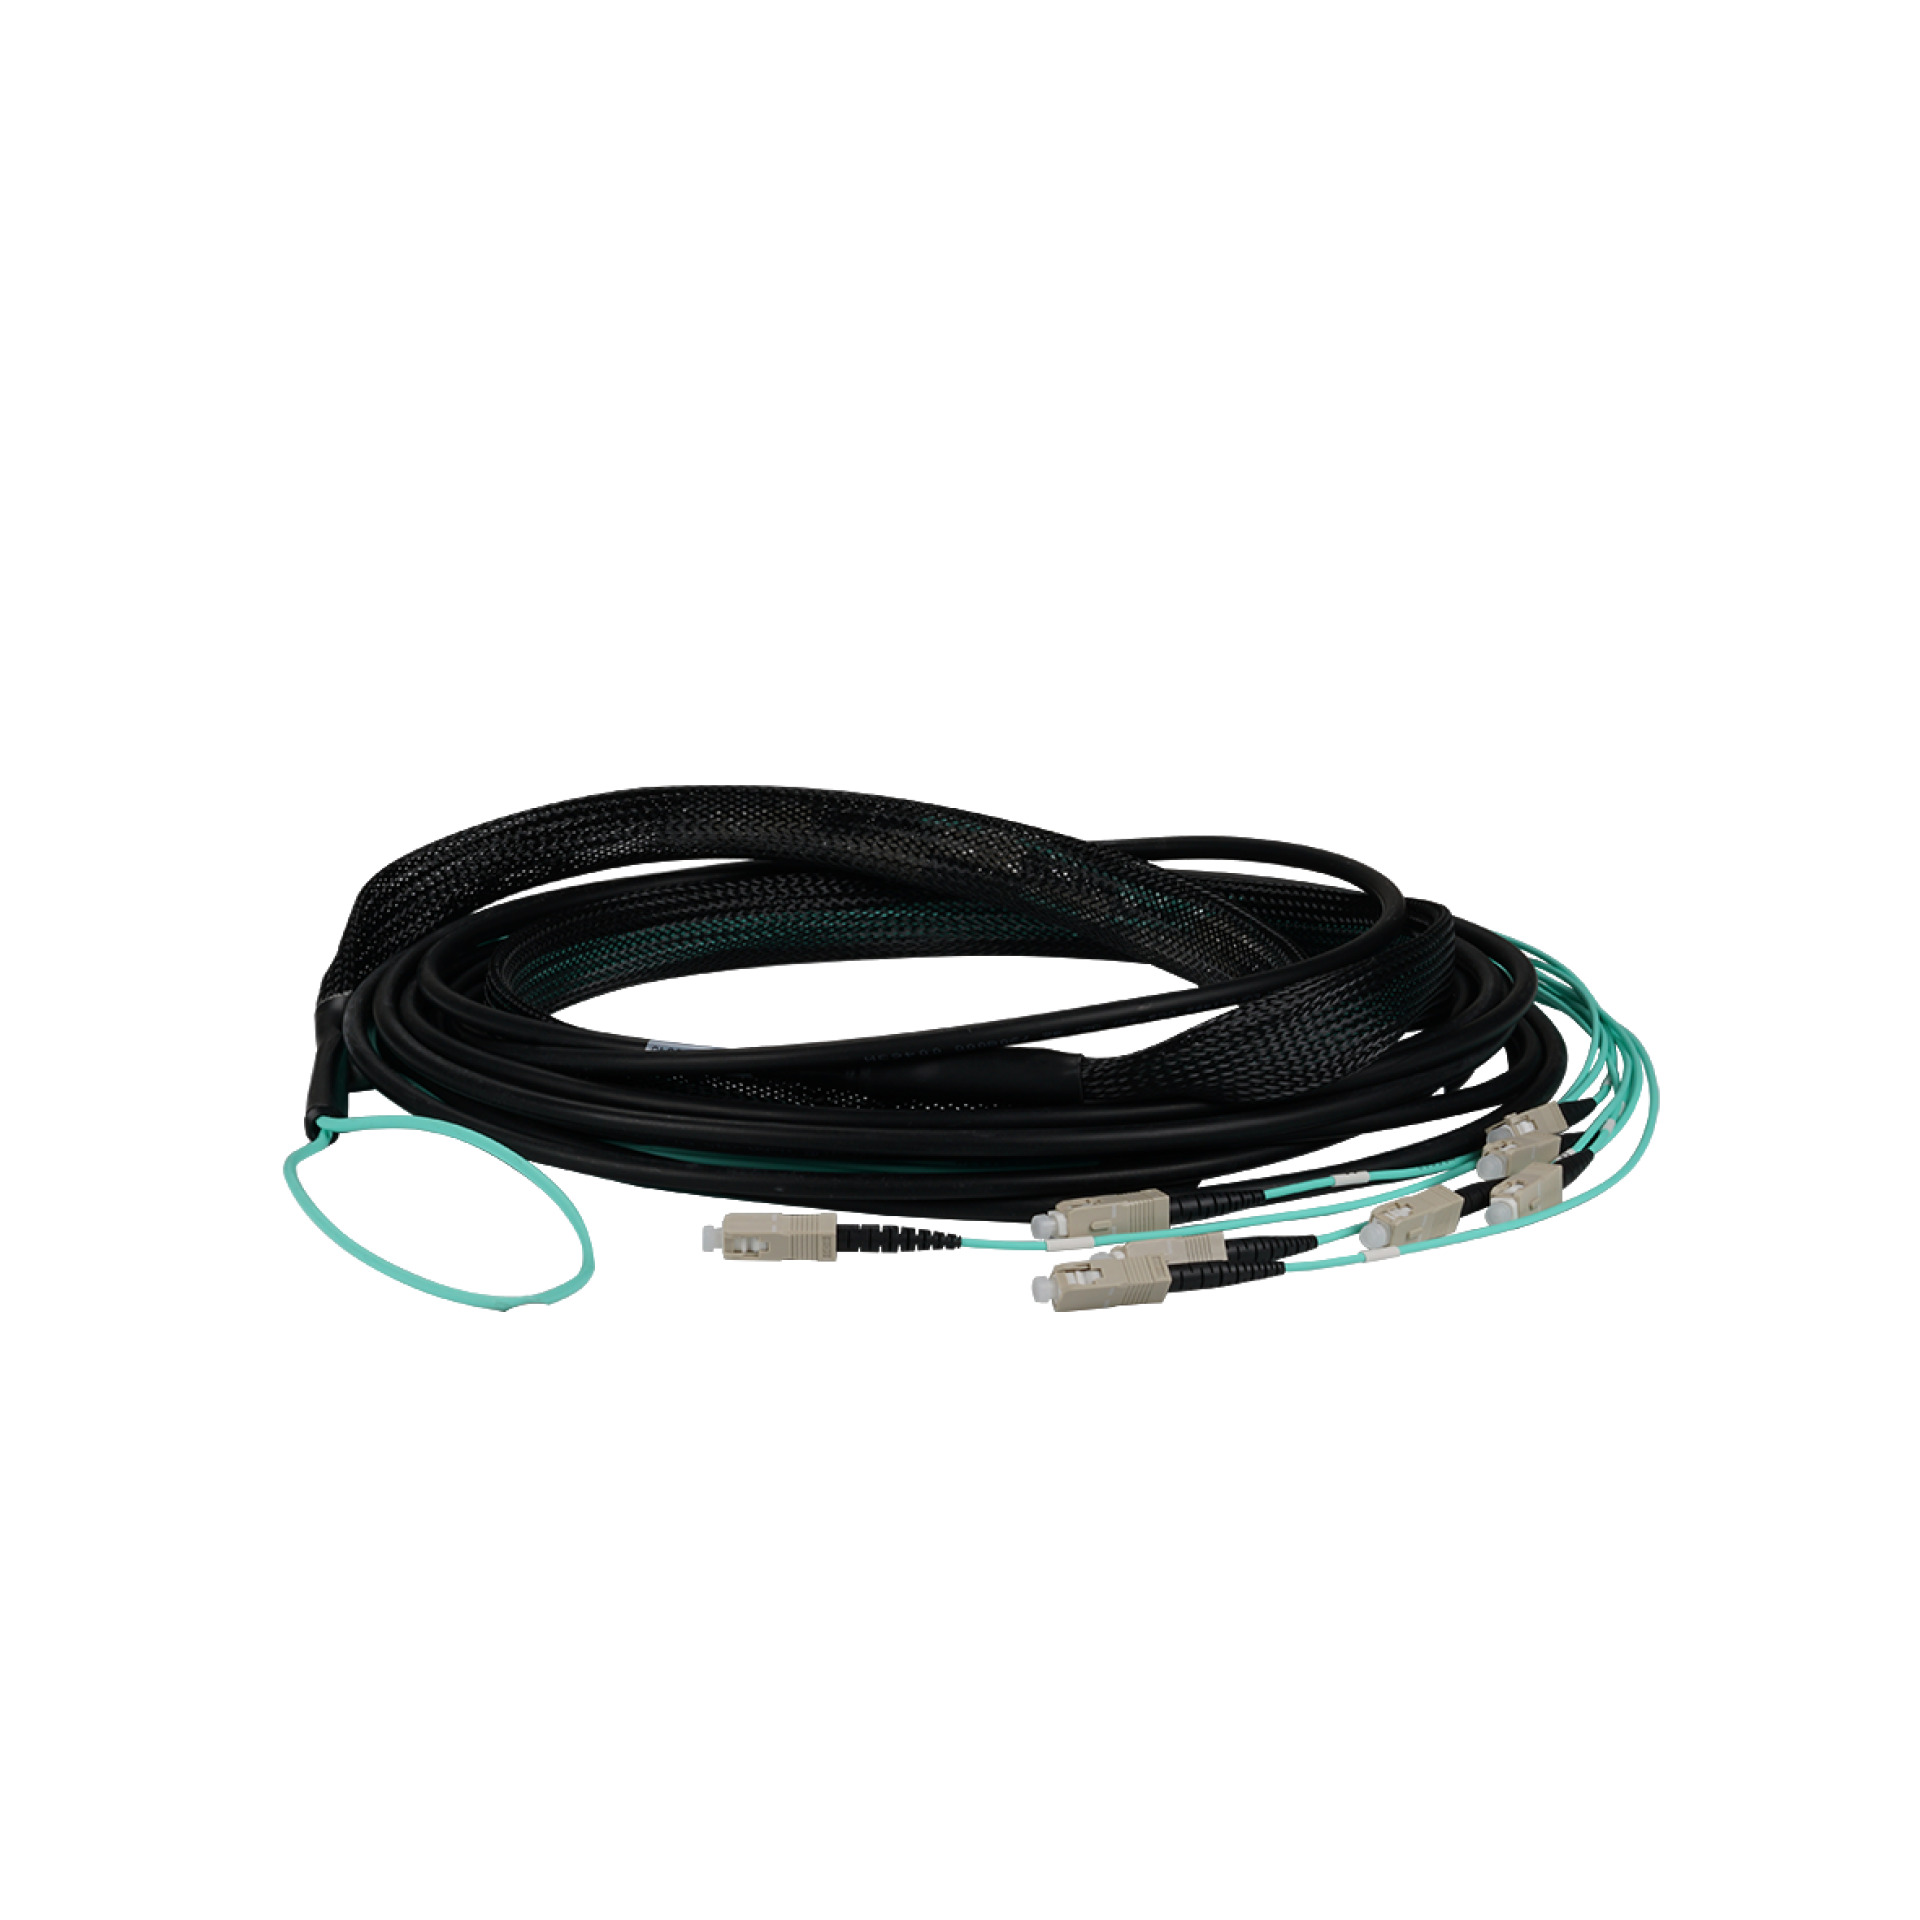 Trunk cable U-DQ(ZN)BH 4G 50/125, SC/SC OM3 60m